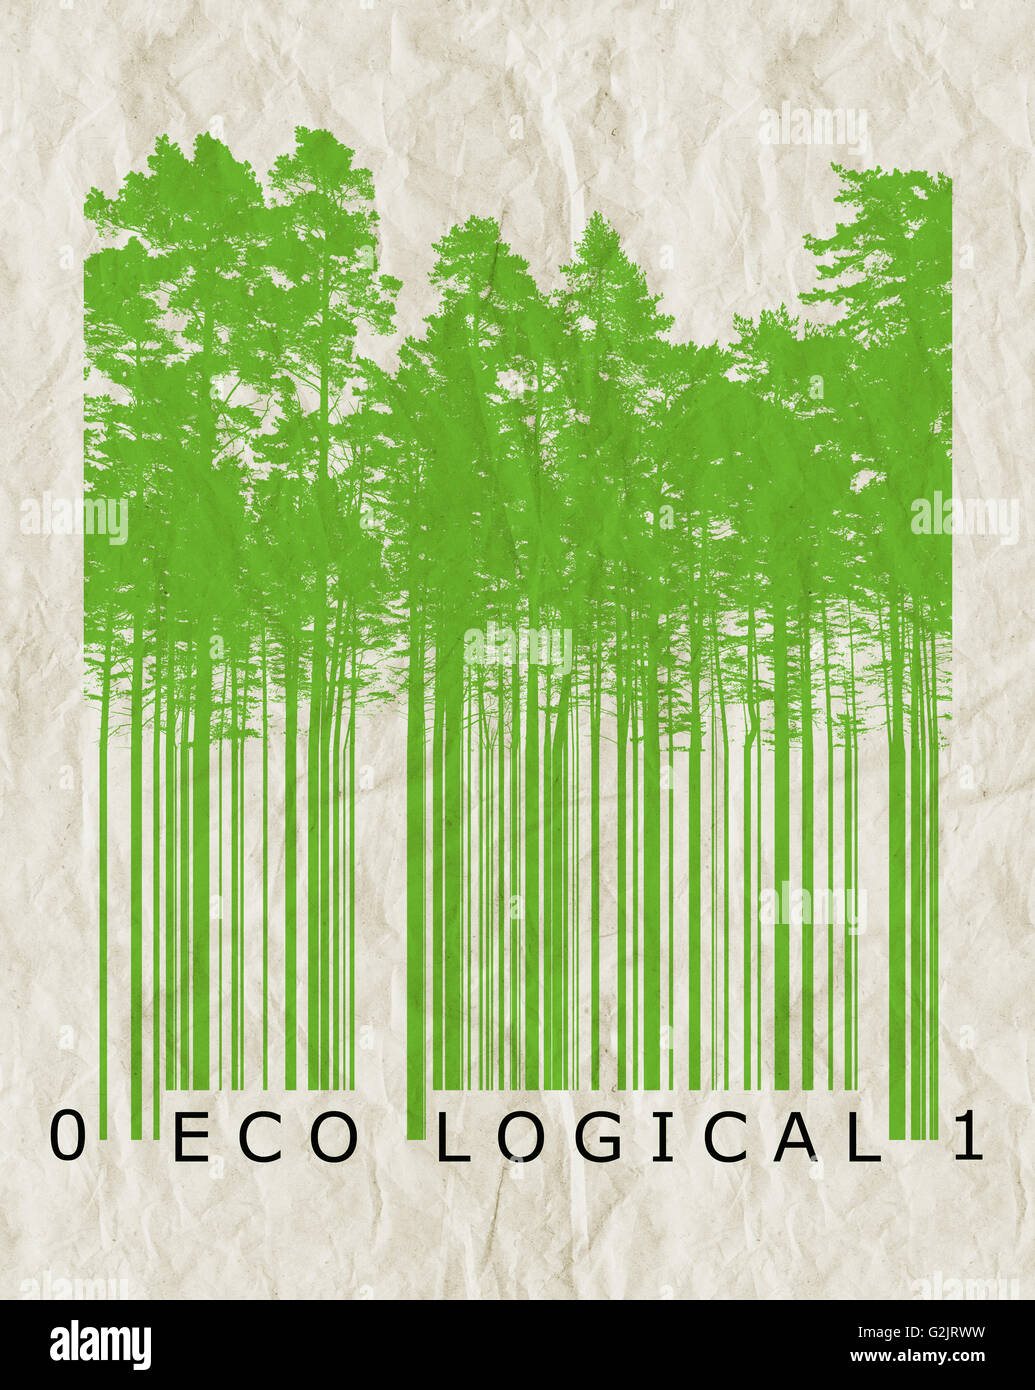 Ecological natural product bar code concept with green trees silhouettes over old paper texture Stock Photo